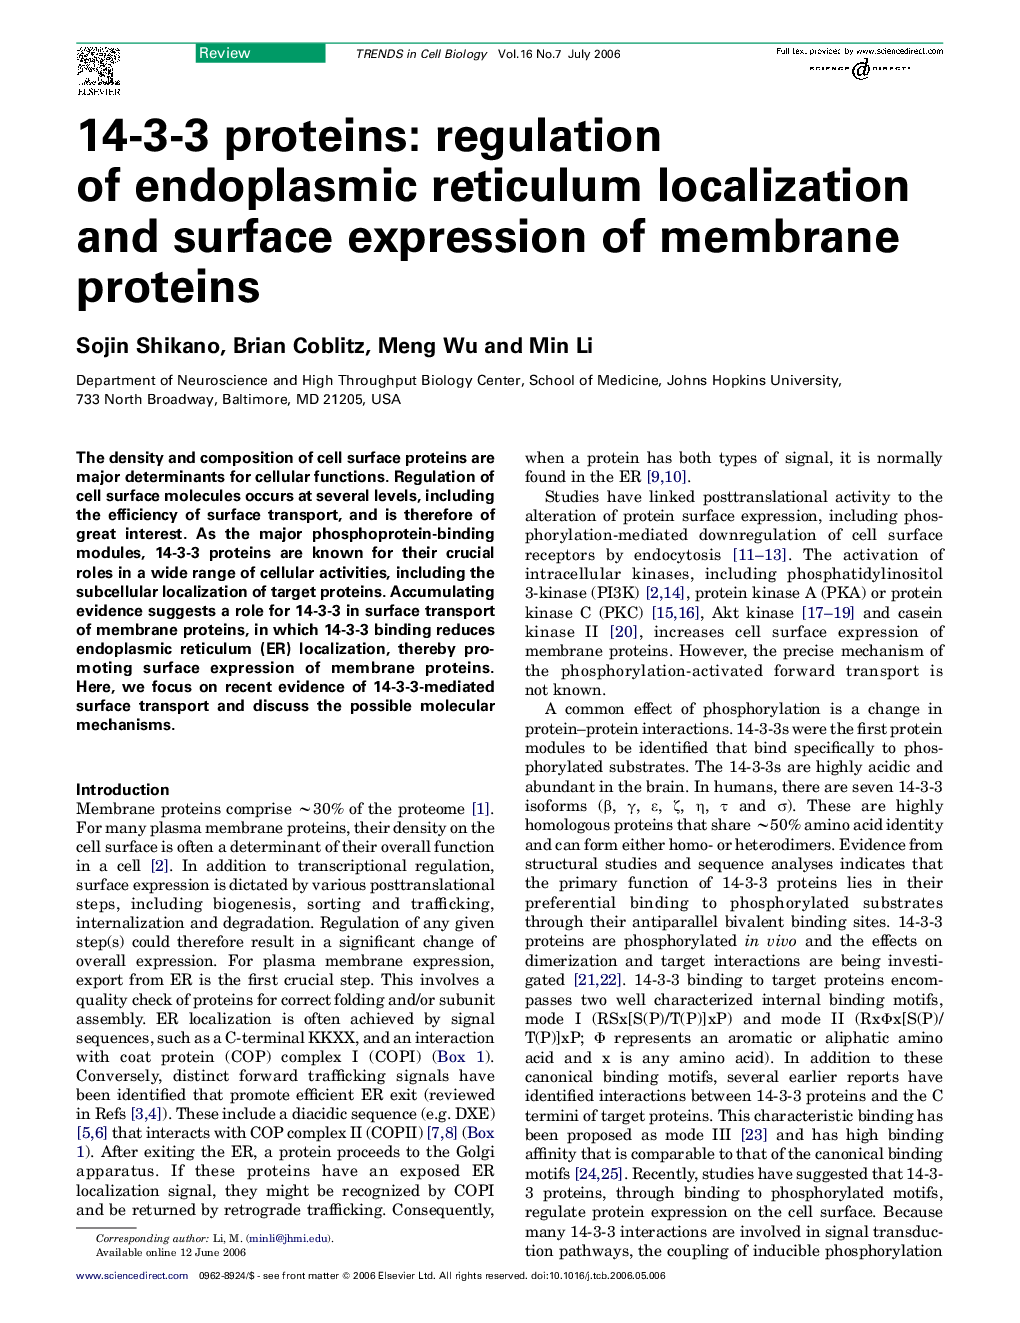 14-3-3 proteins: regulation of endoplasmic reticulum localization and surface expression of membrane proteins